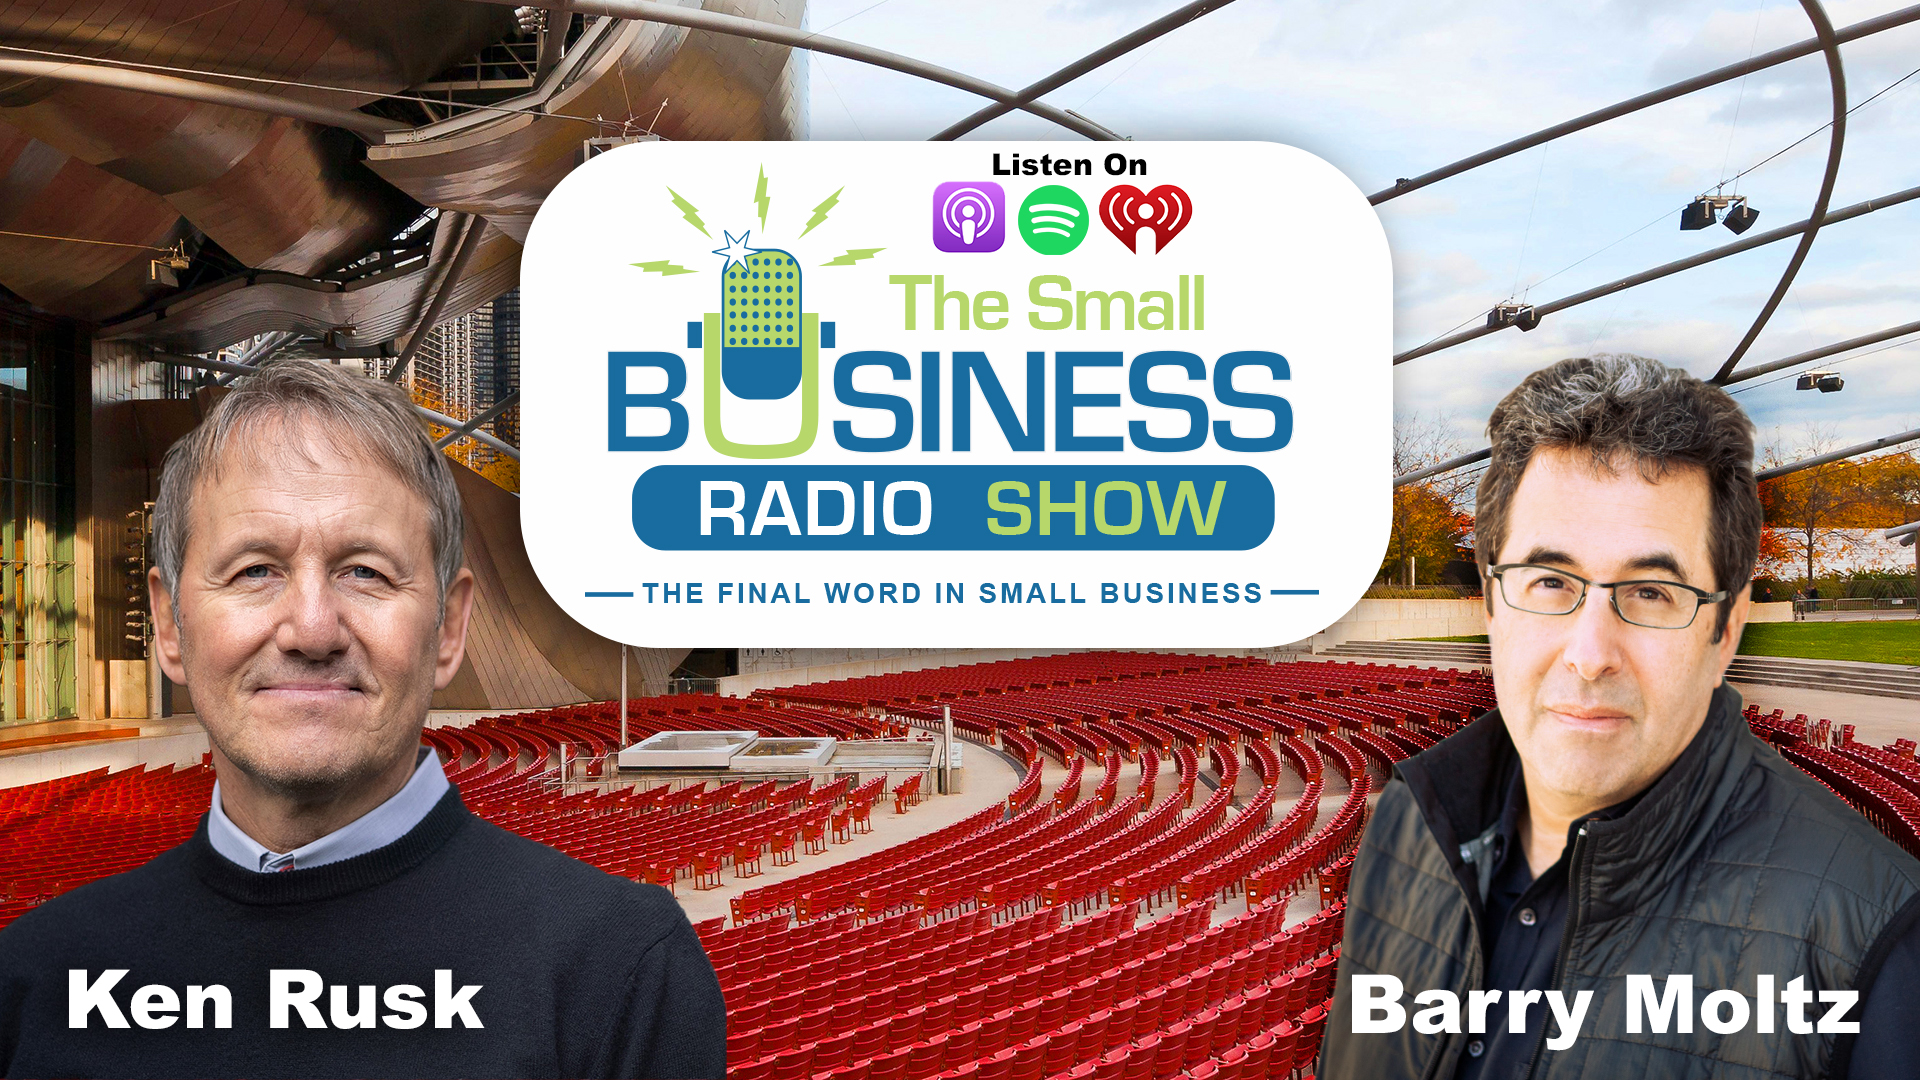 Ken Rusk on The Small Business Radio Show